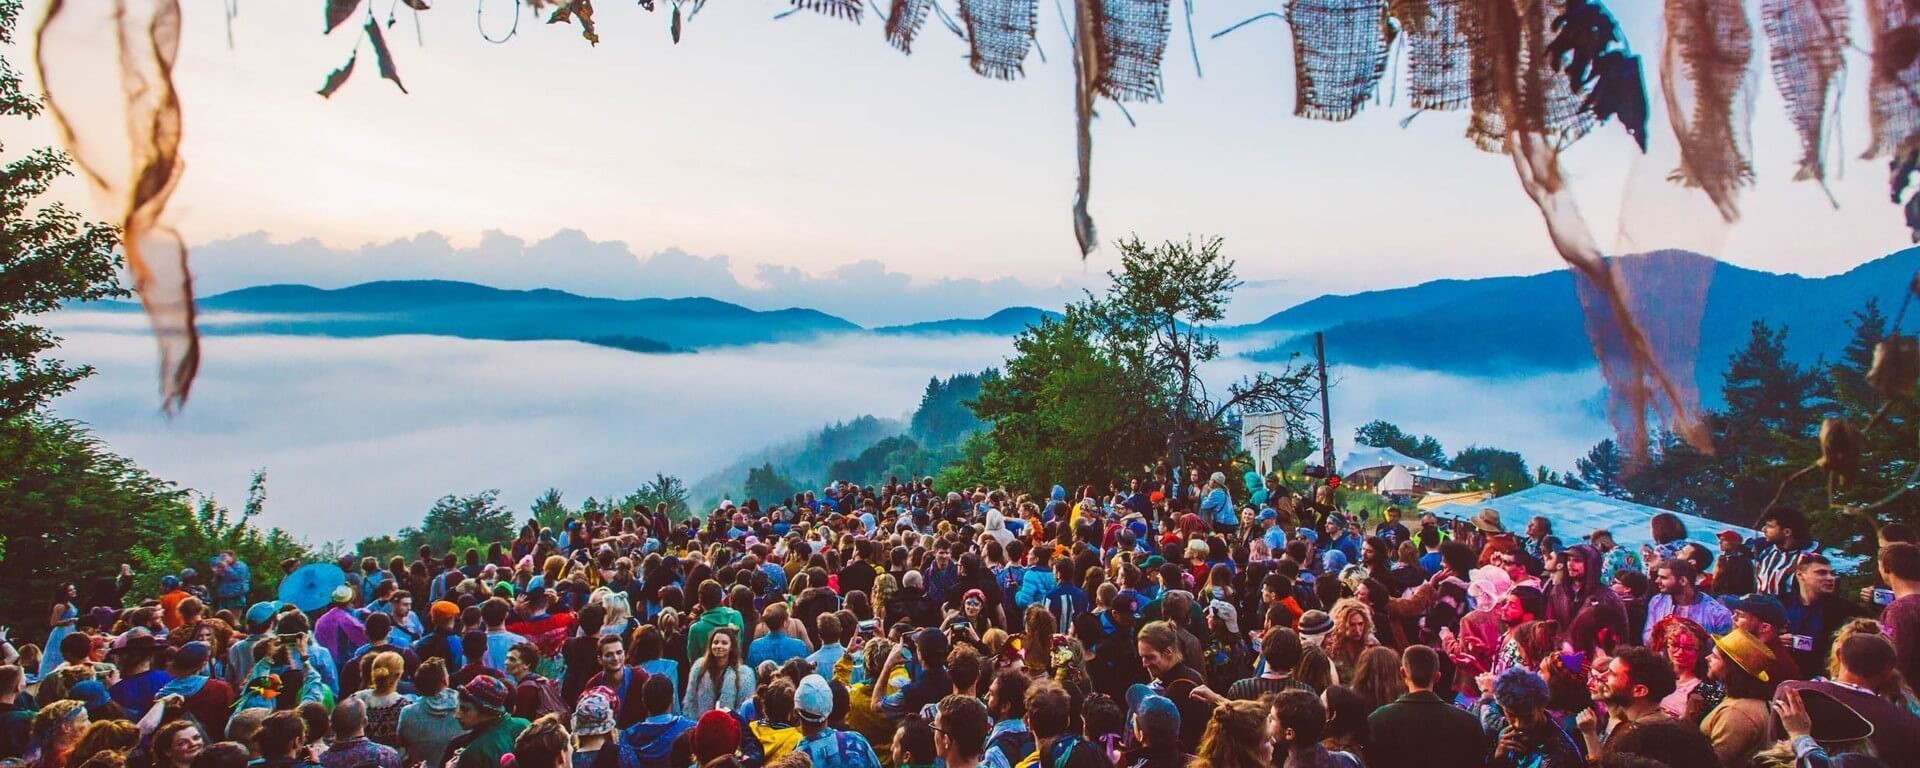 Mountain Fest 2022 Schedule The Billionaires Plan - Lifeuber - Music Festivals - Meadows In The Mountains  Festival 2022